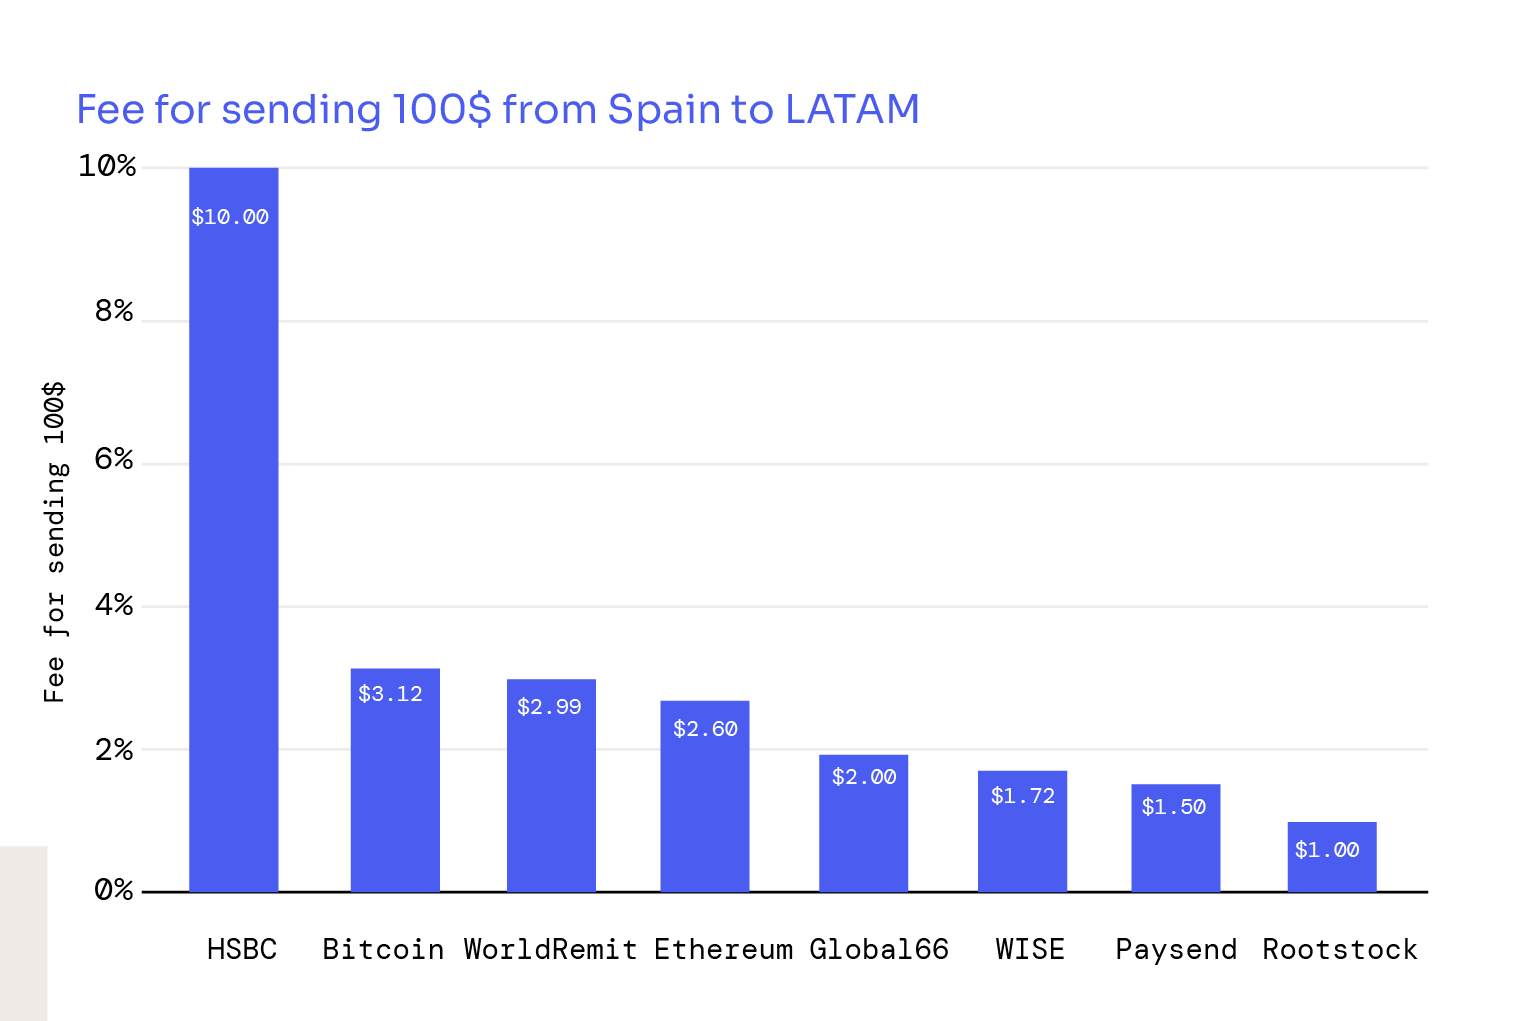 Fee for sending 100$ from Spain to LATAM using different platforms.